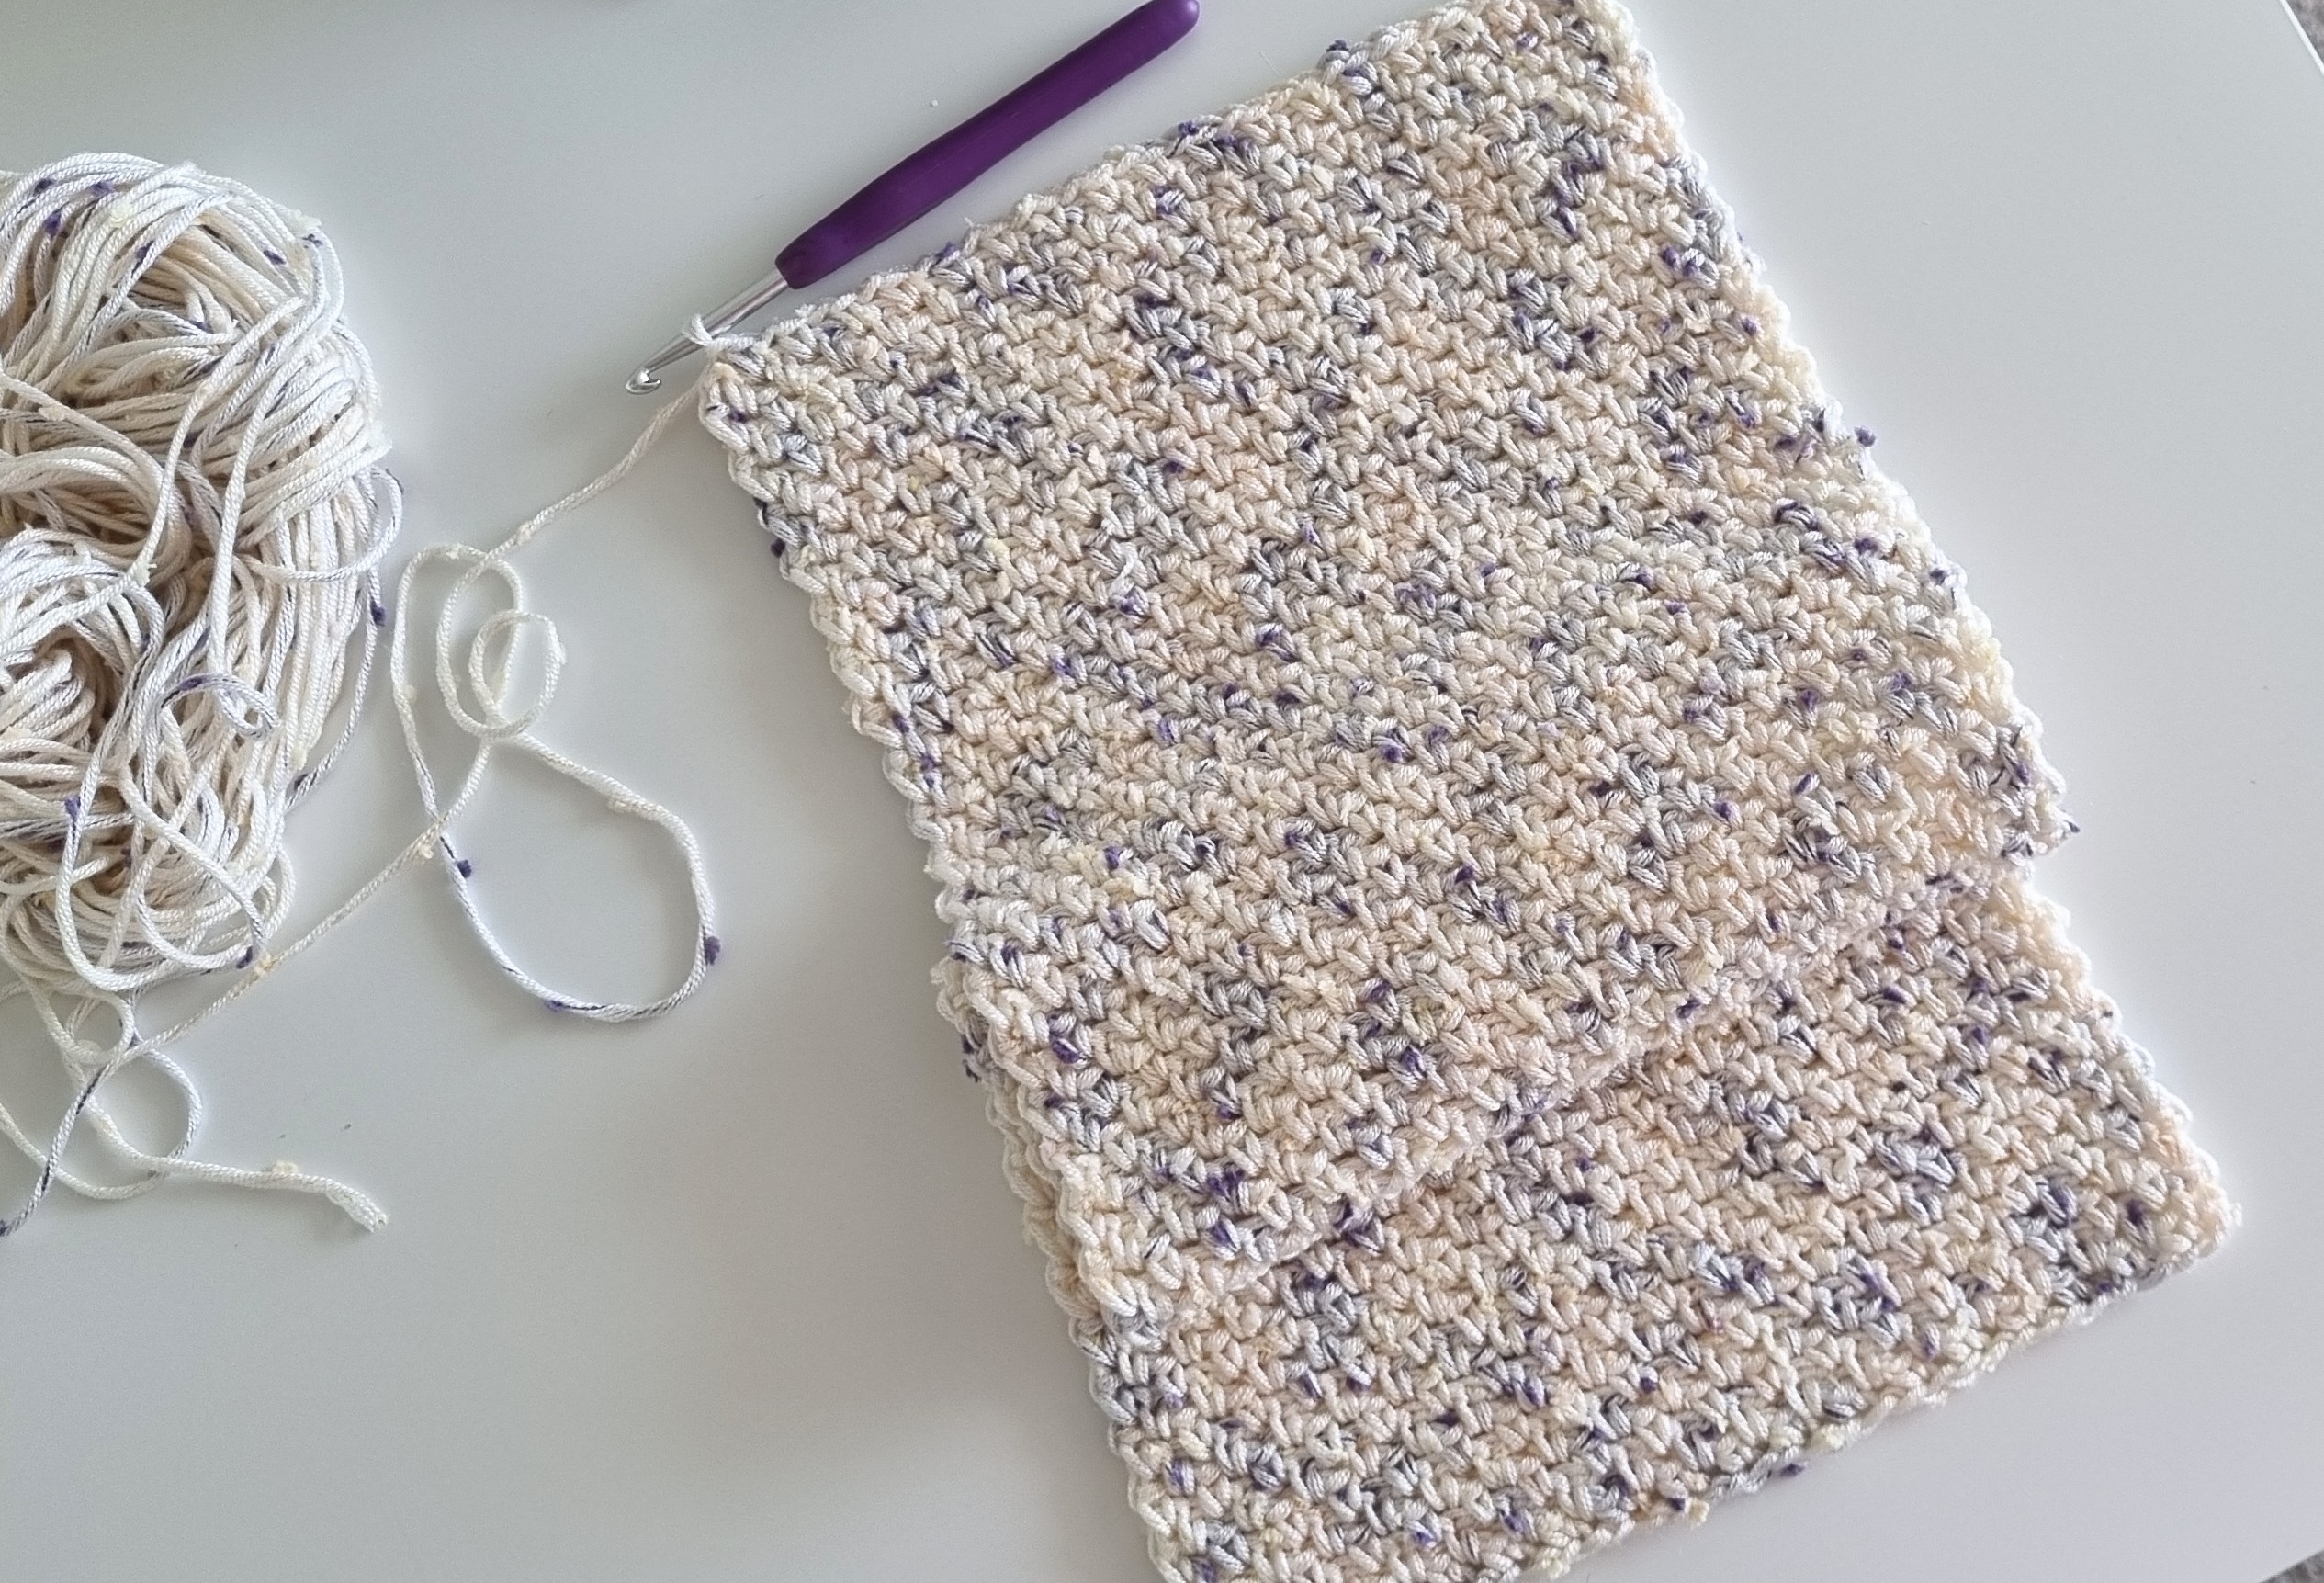 Quick and Easy Crochet Can Cozy Pattern - Extended Moss Stitch Crochet  Pattern Free On Blog 